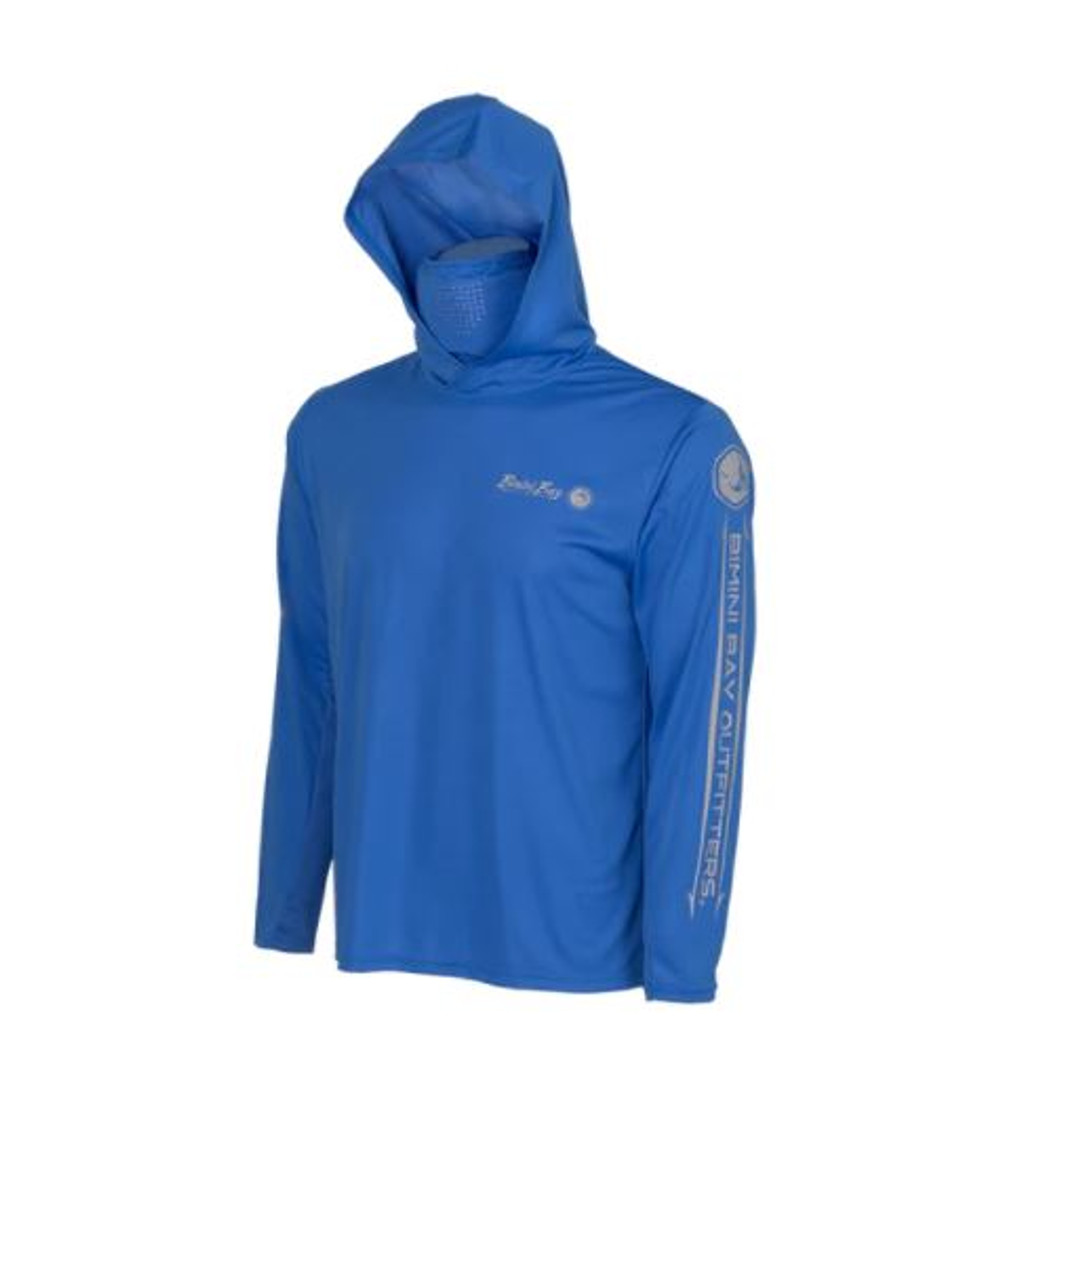 Bimini Bay Outfitters Hatteras Performance Hoodie with Gaiter Featuring BloodGuard Plus